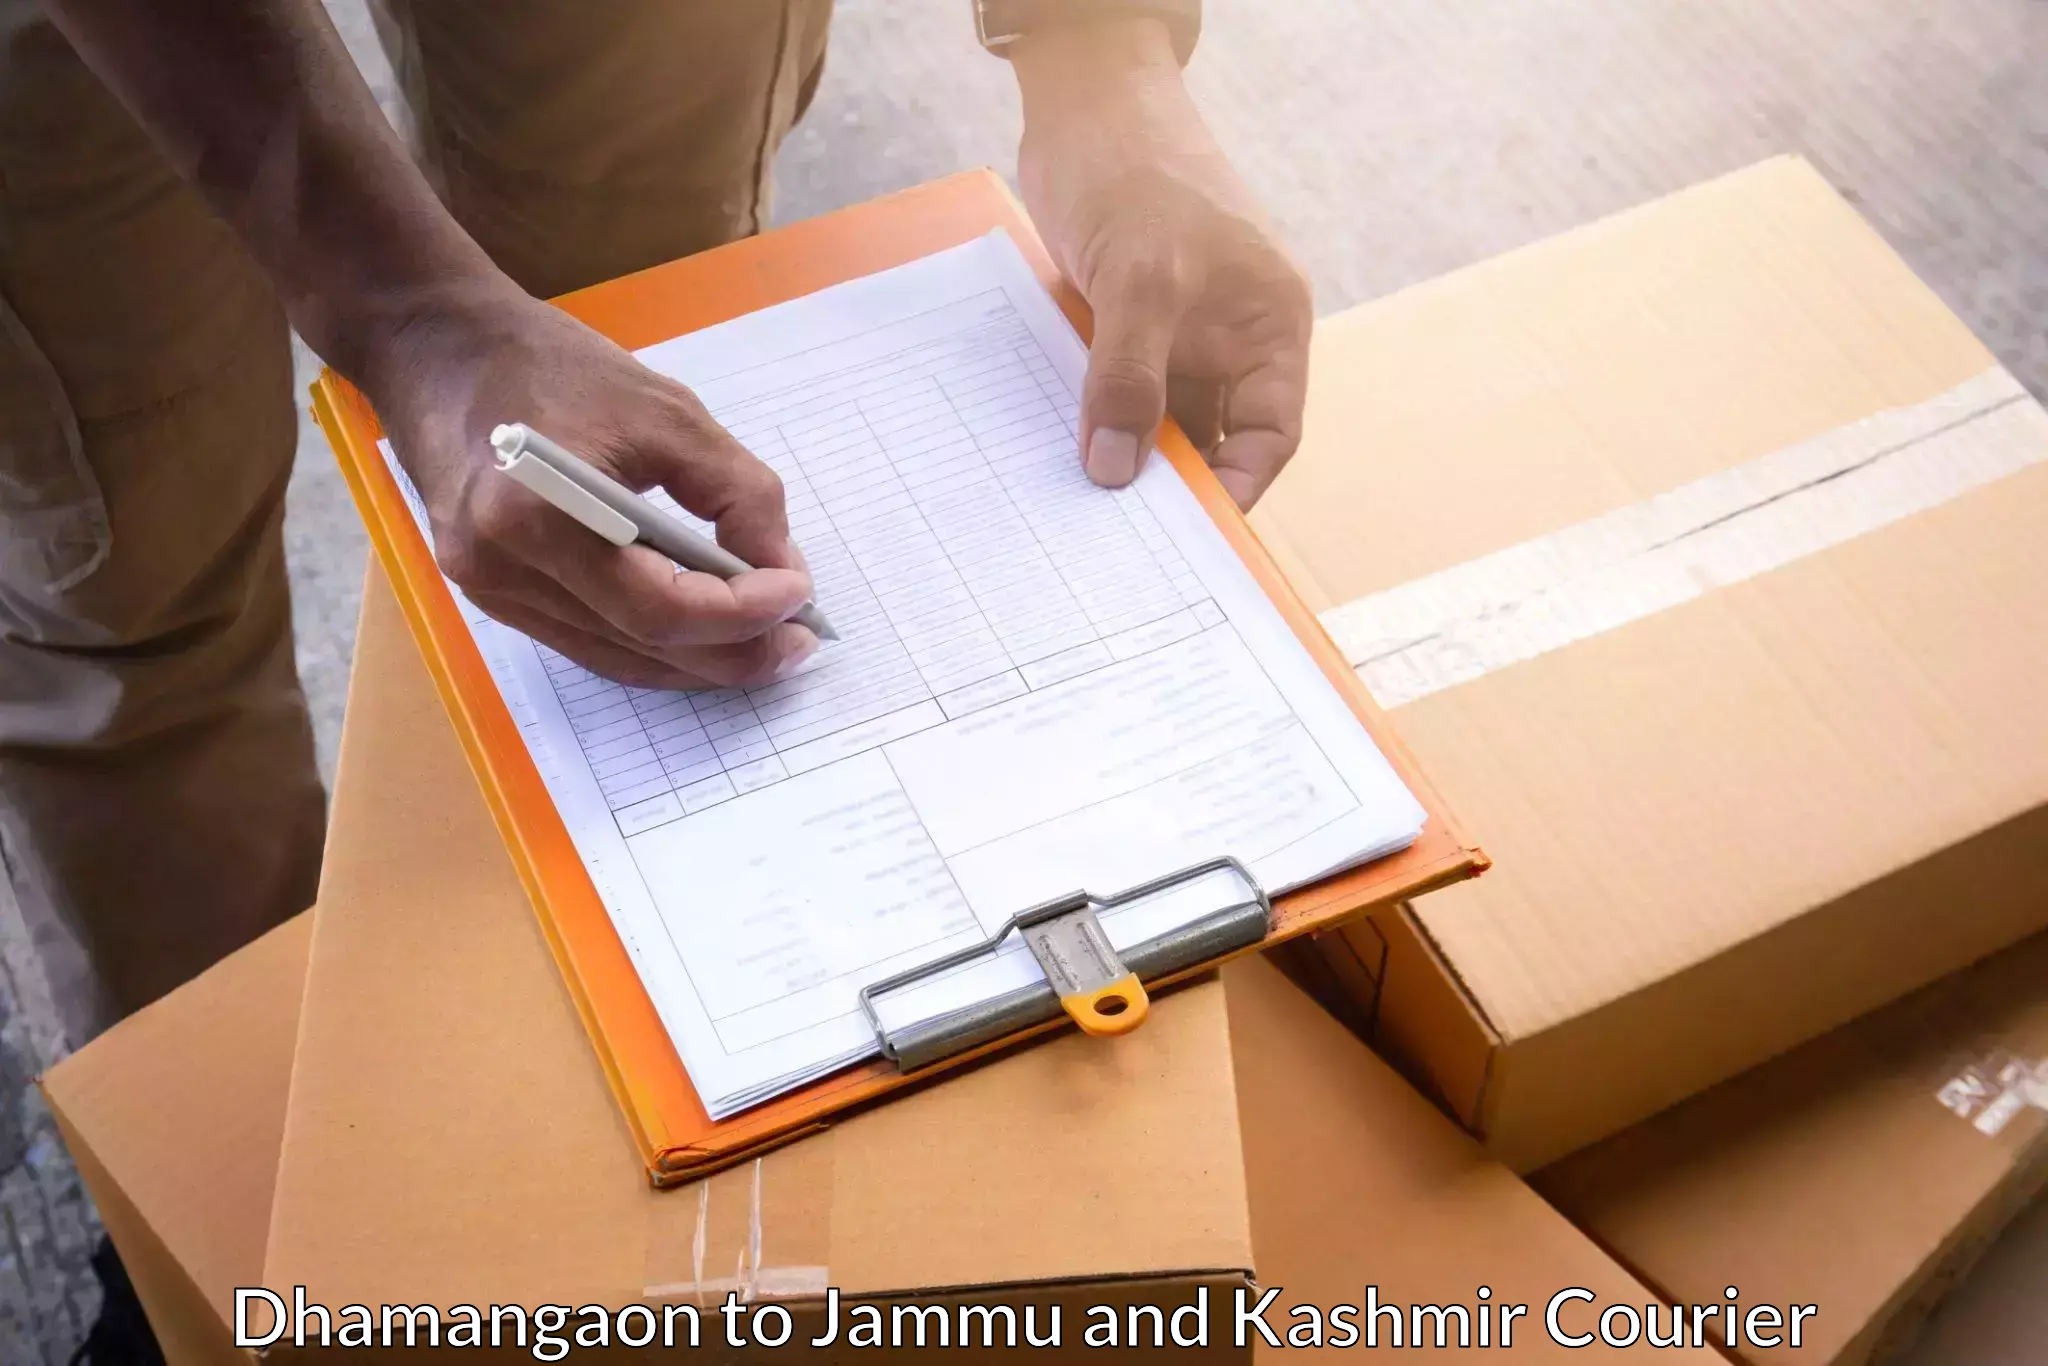 24/7 courier service in Dhamangaon to Sunderbani